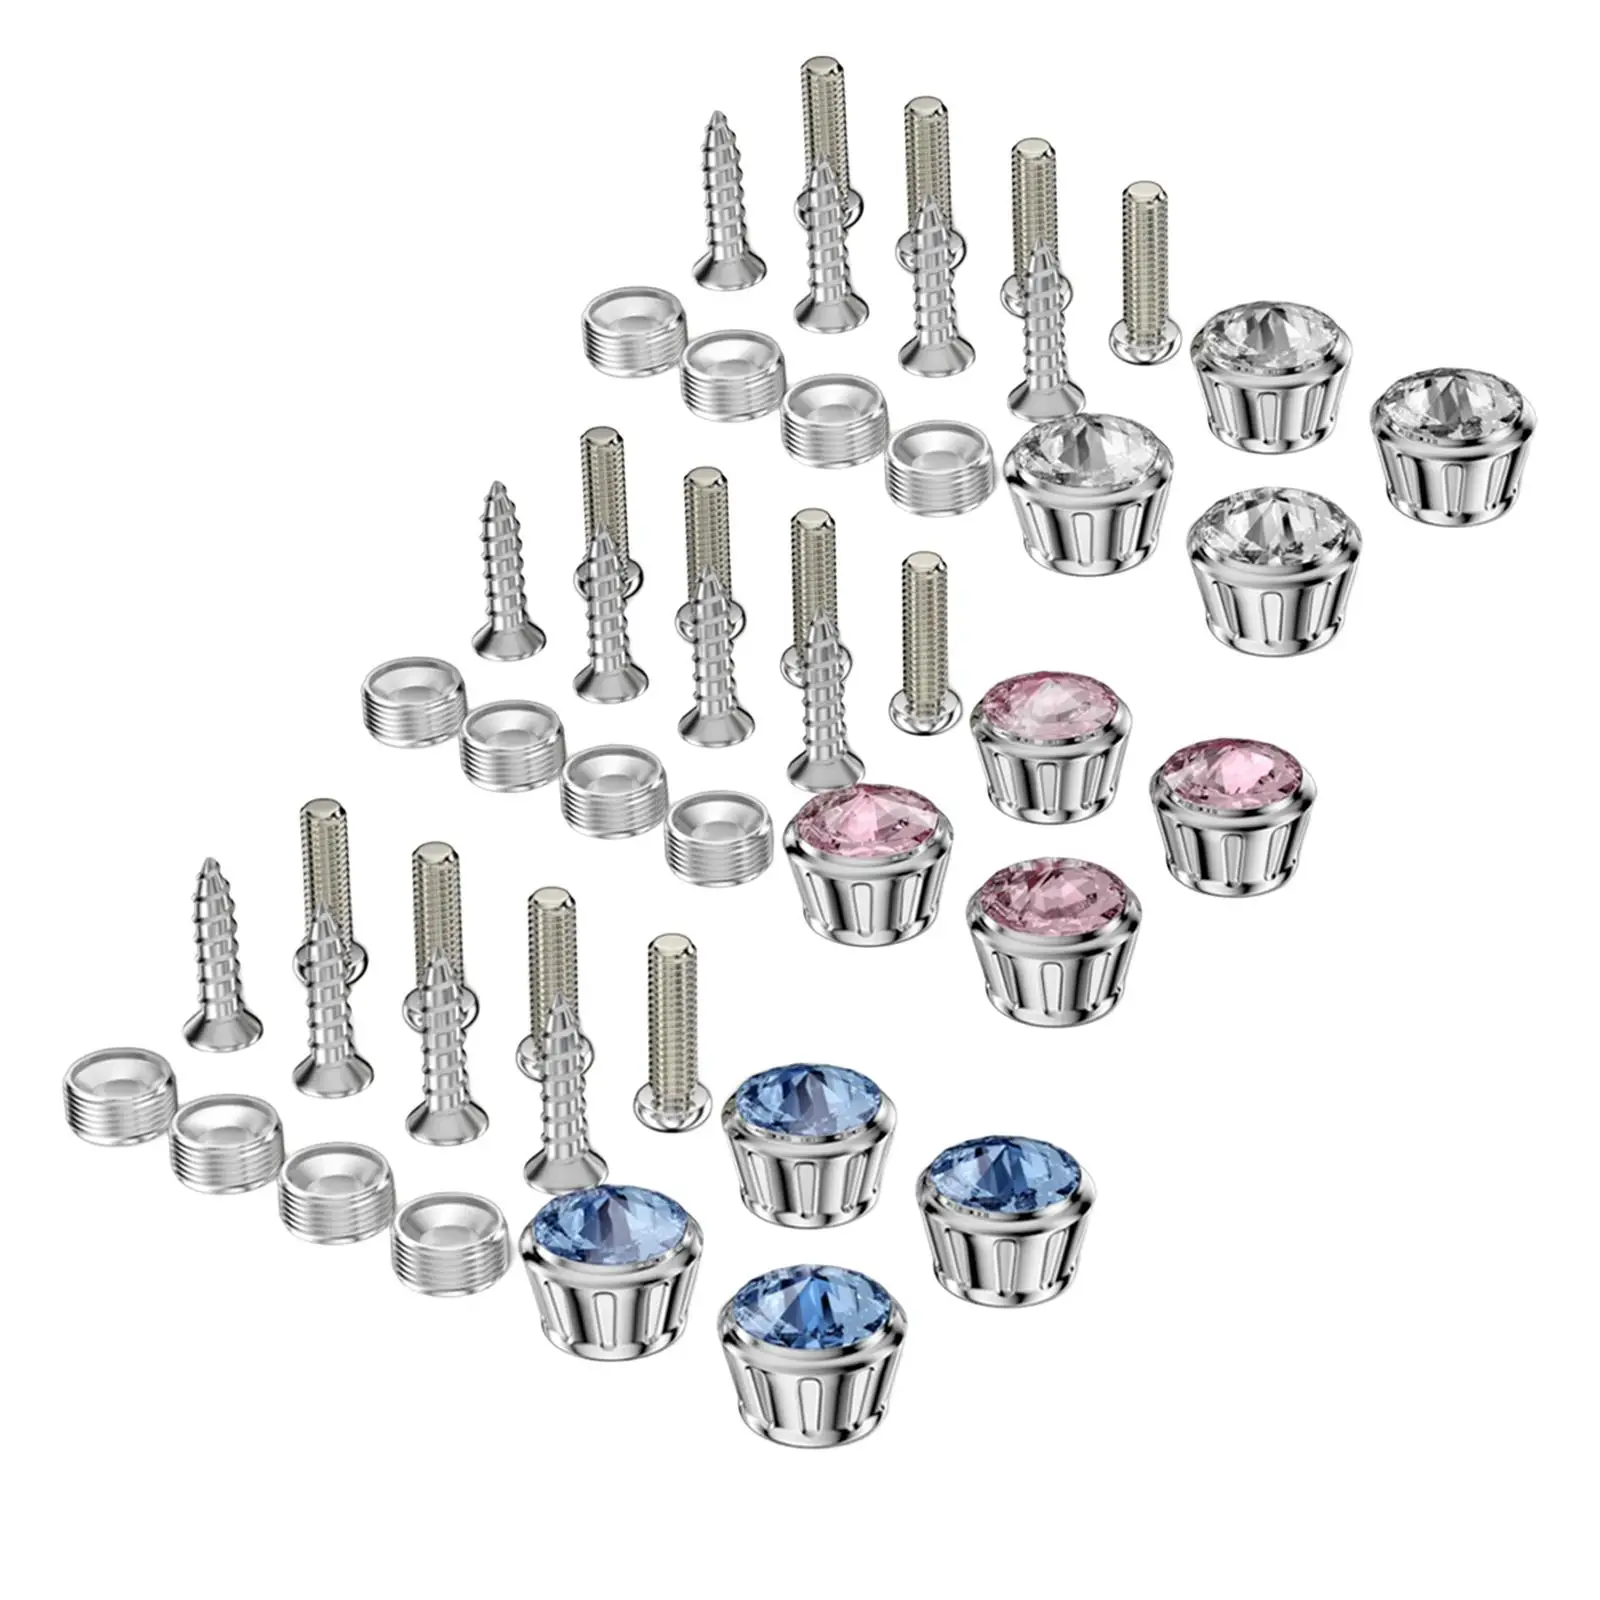 16 Pieces Car Anti Theft License Plate Screws Kit Fit for Cars Tag Frame